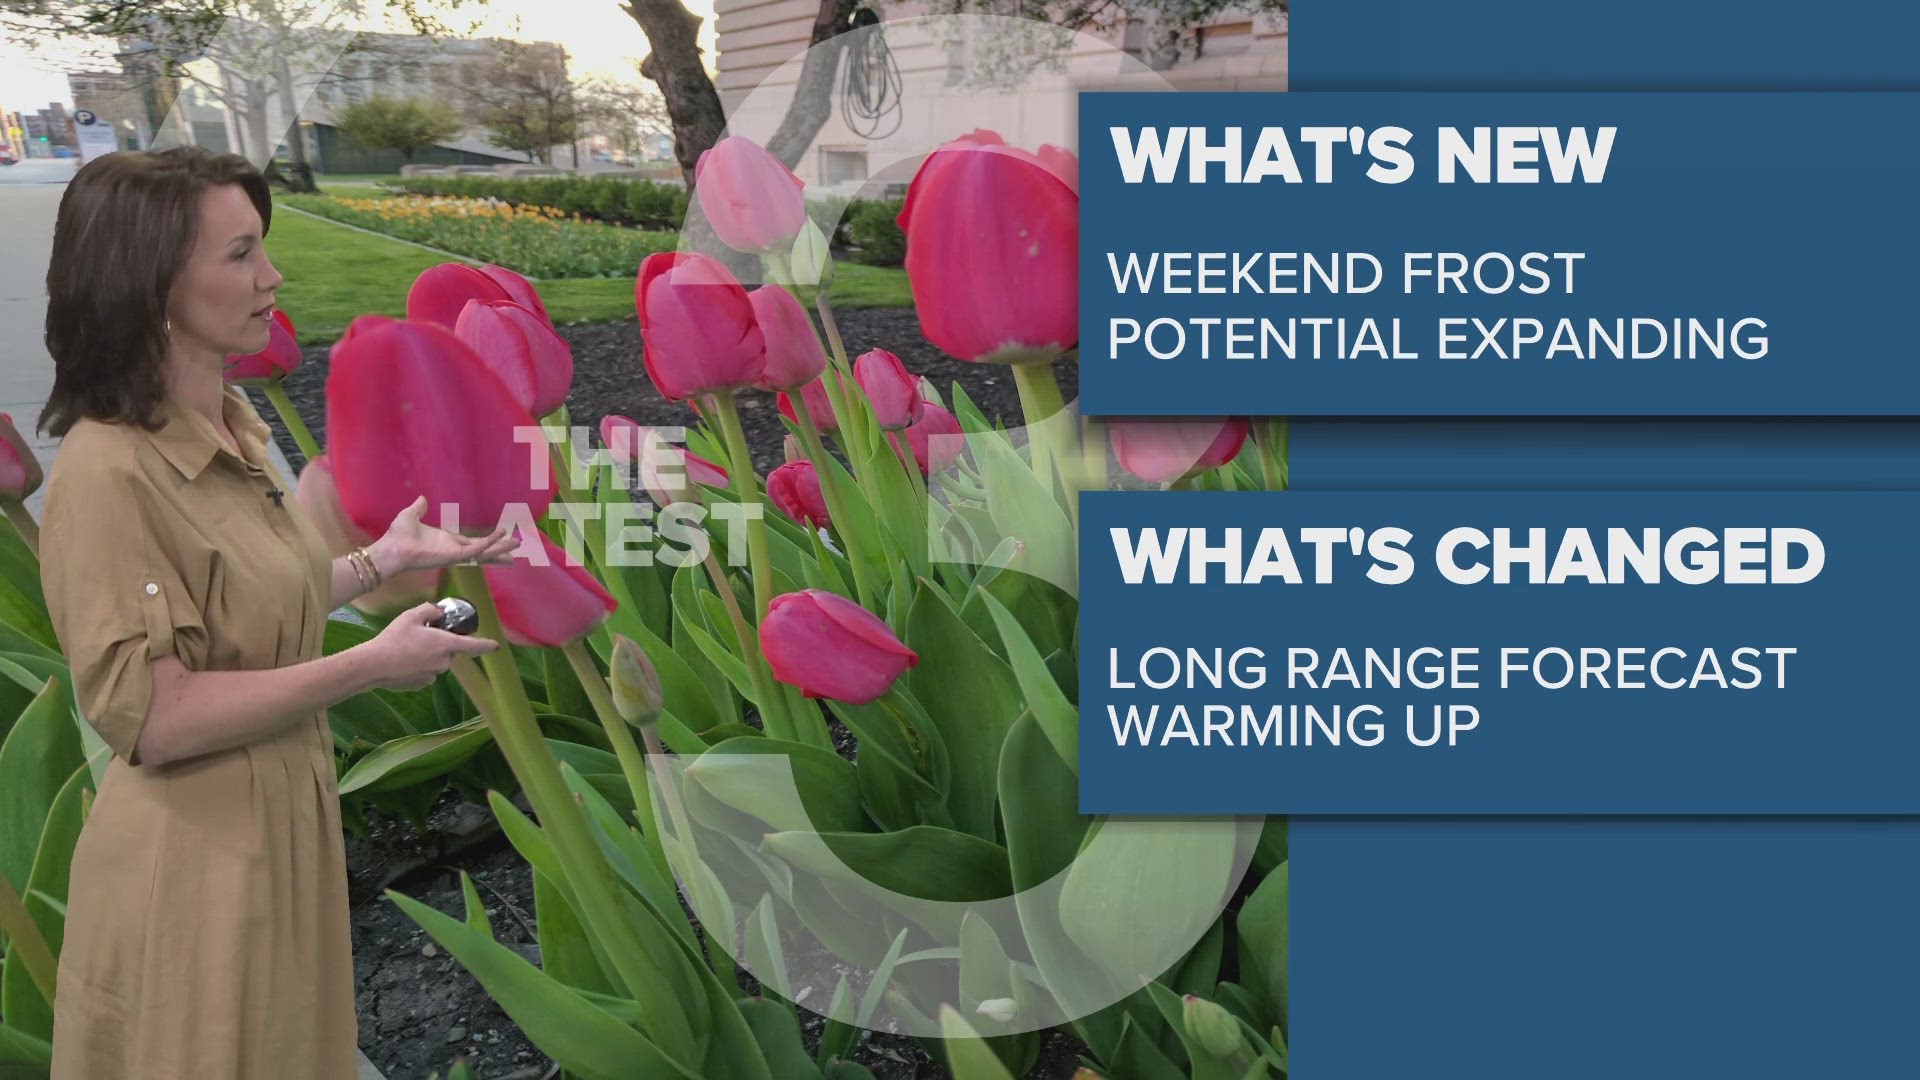 Cooler conditions this weekend in Northeast Ohio.